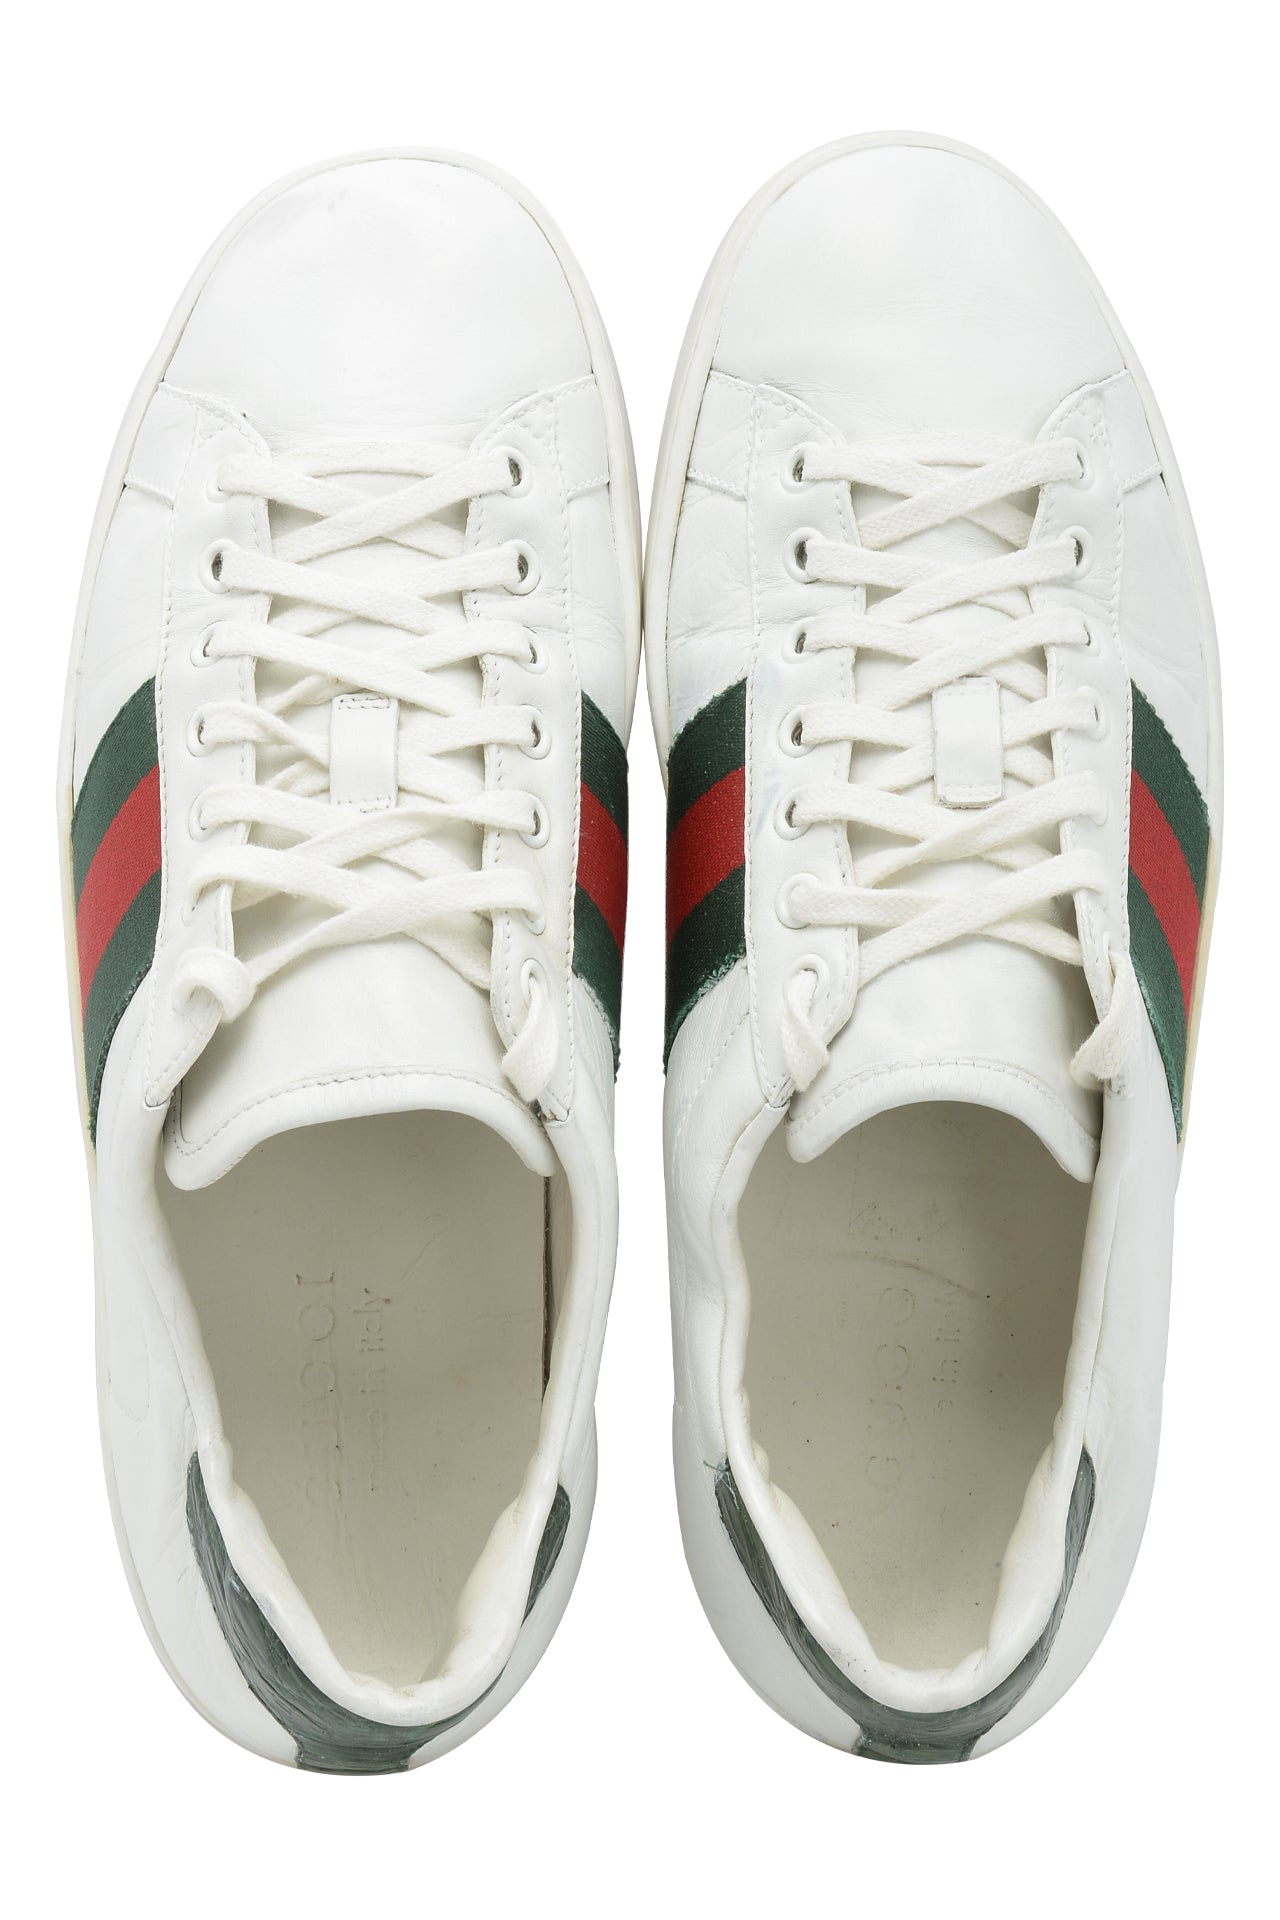 Gucci White Leather Ace Low Top Sneakers EU 40